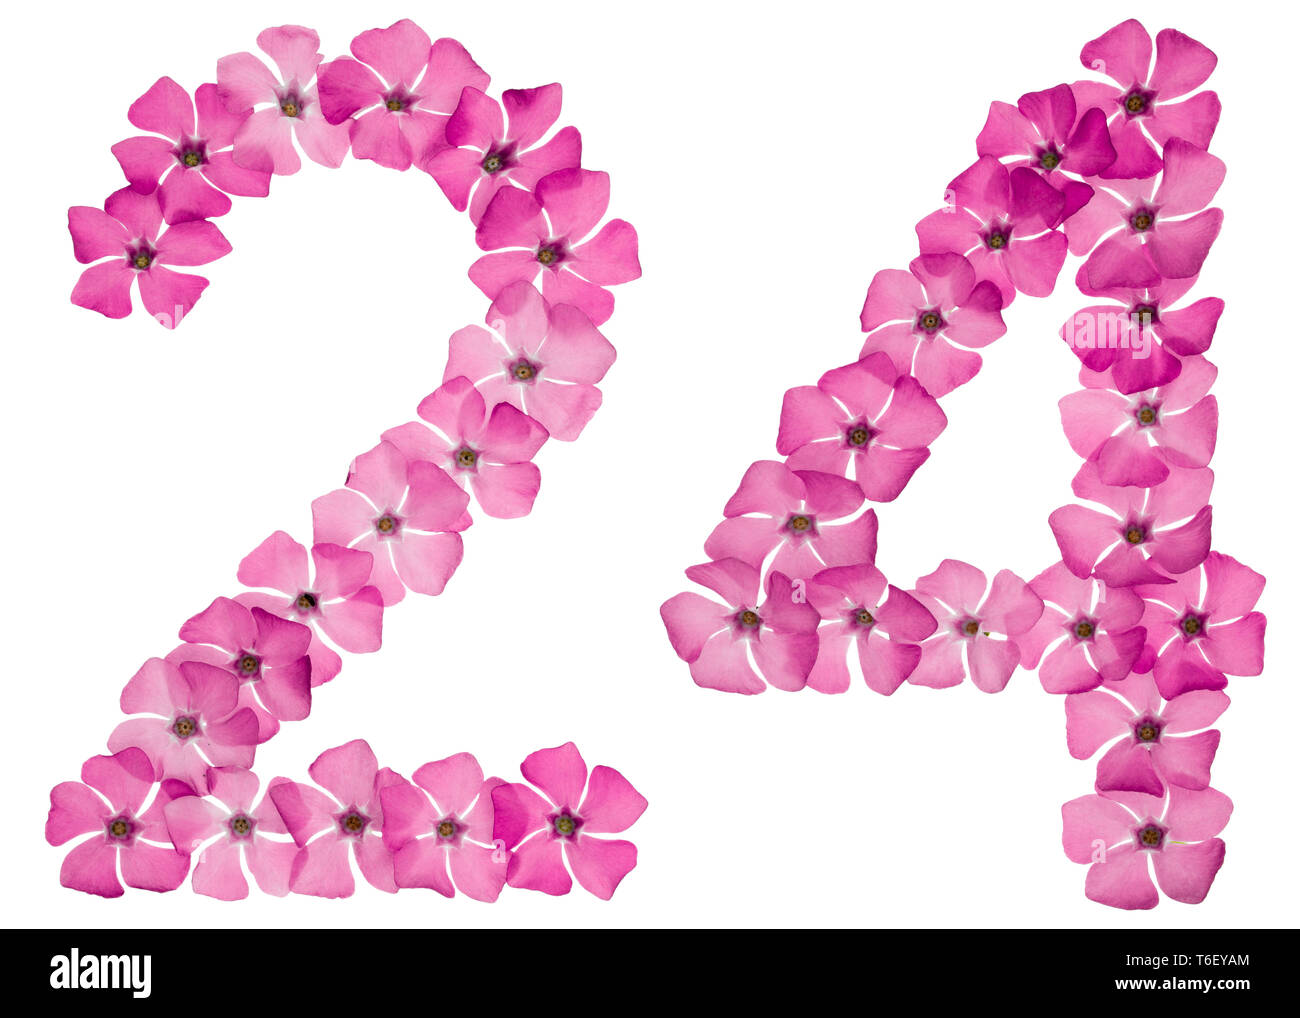 Numeral 24, twenty four, from natural pink flowers of periwinkle